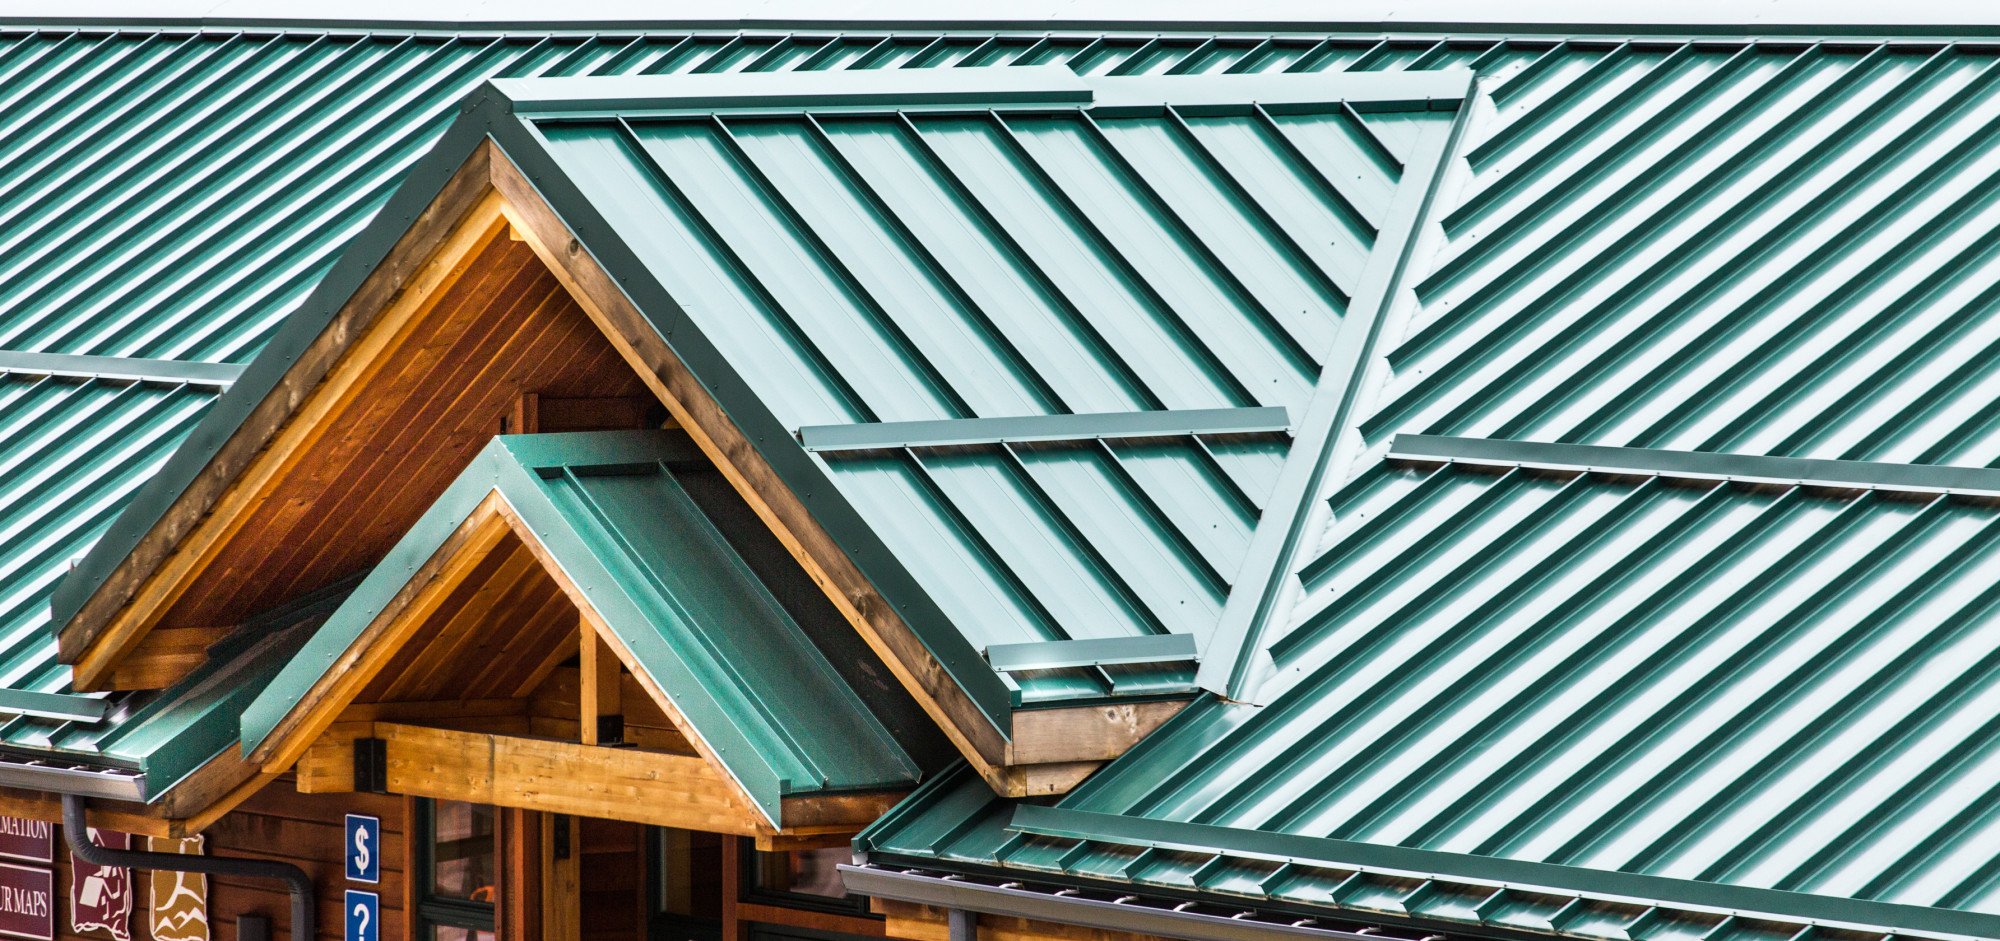 Are you thinking about getting a metal roof but aren't sure where or how to begin? Here is a quick guide to the different types of metal roofing.